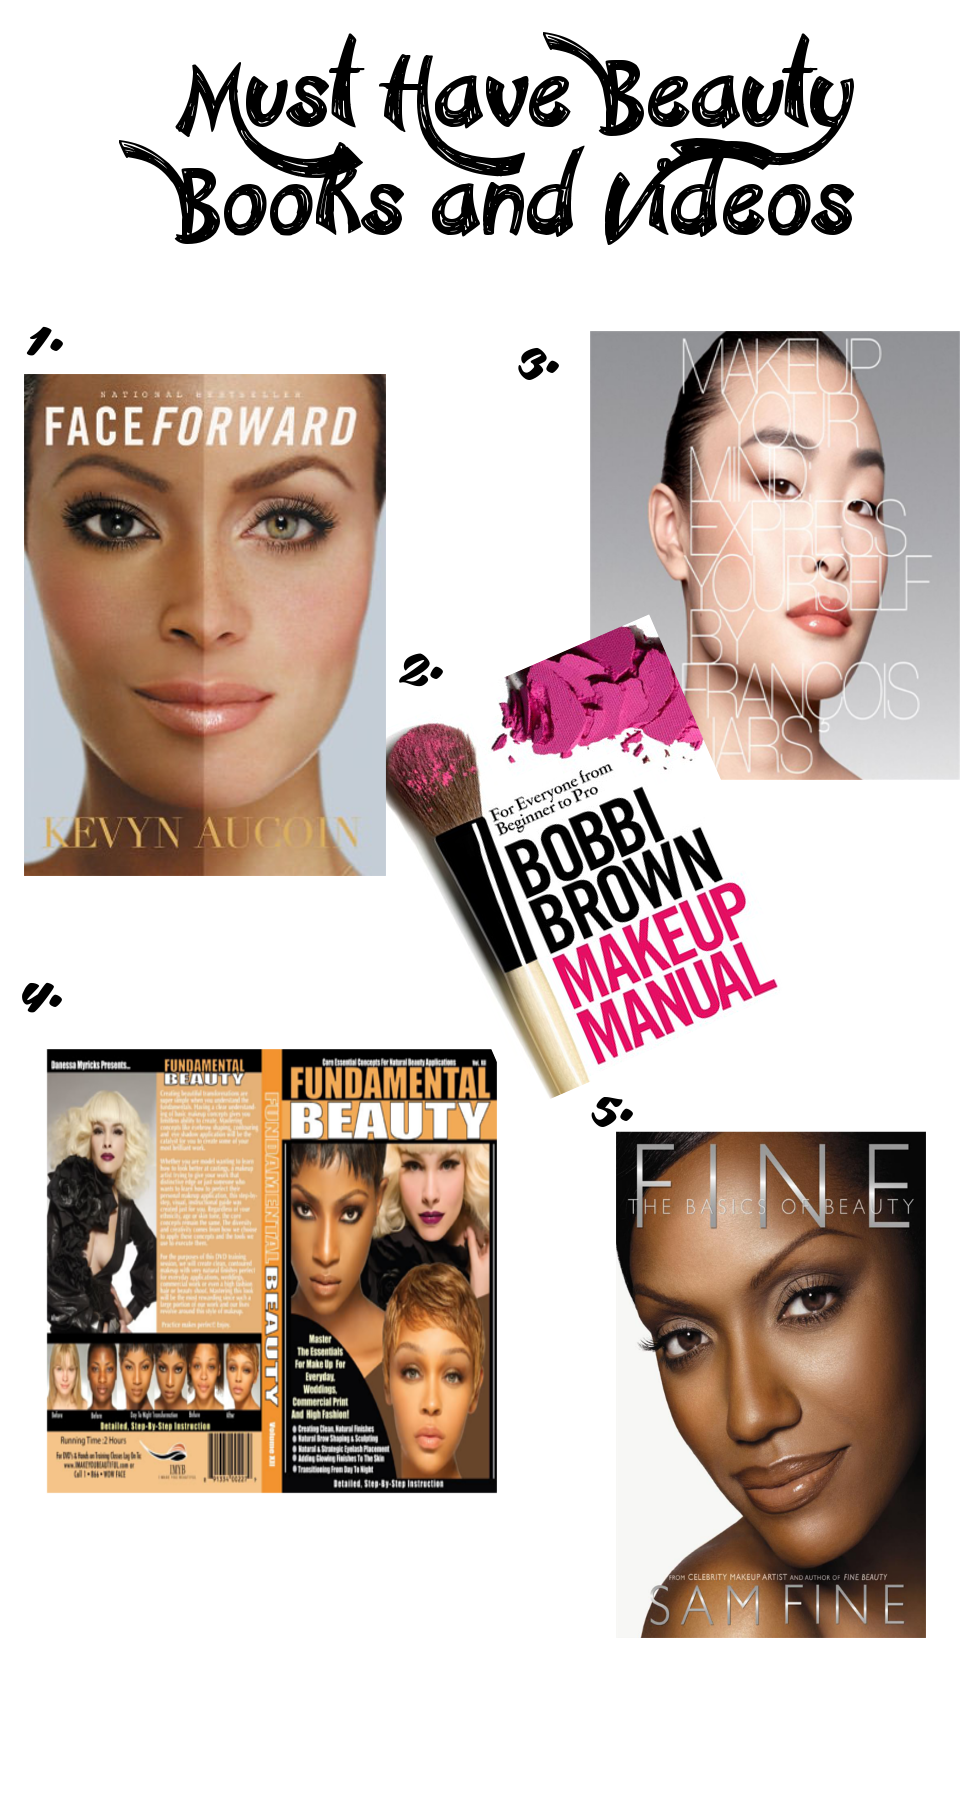 Must Have Beauty Books and Videos